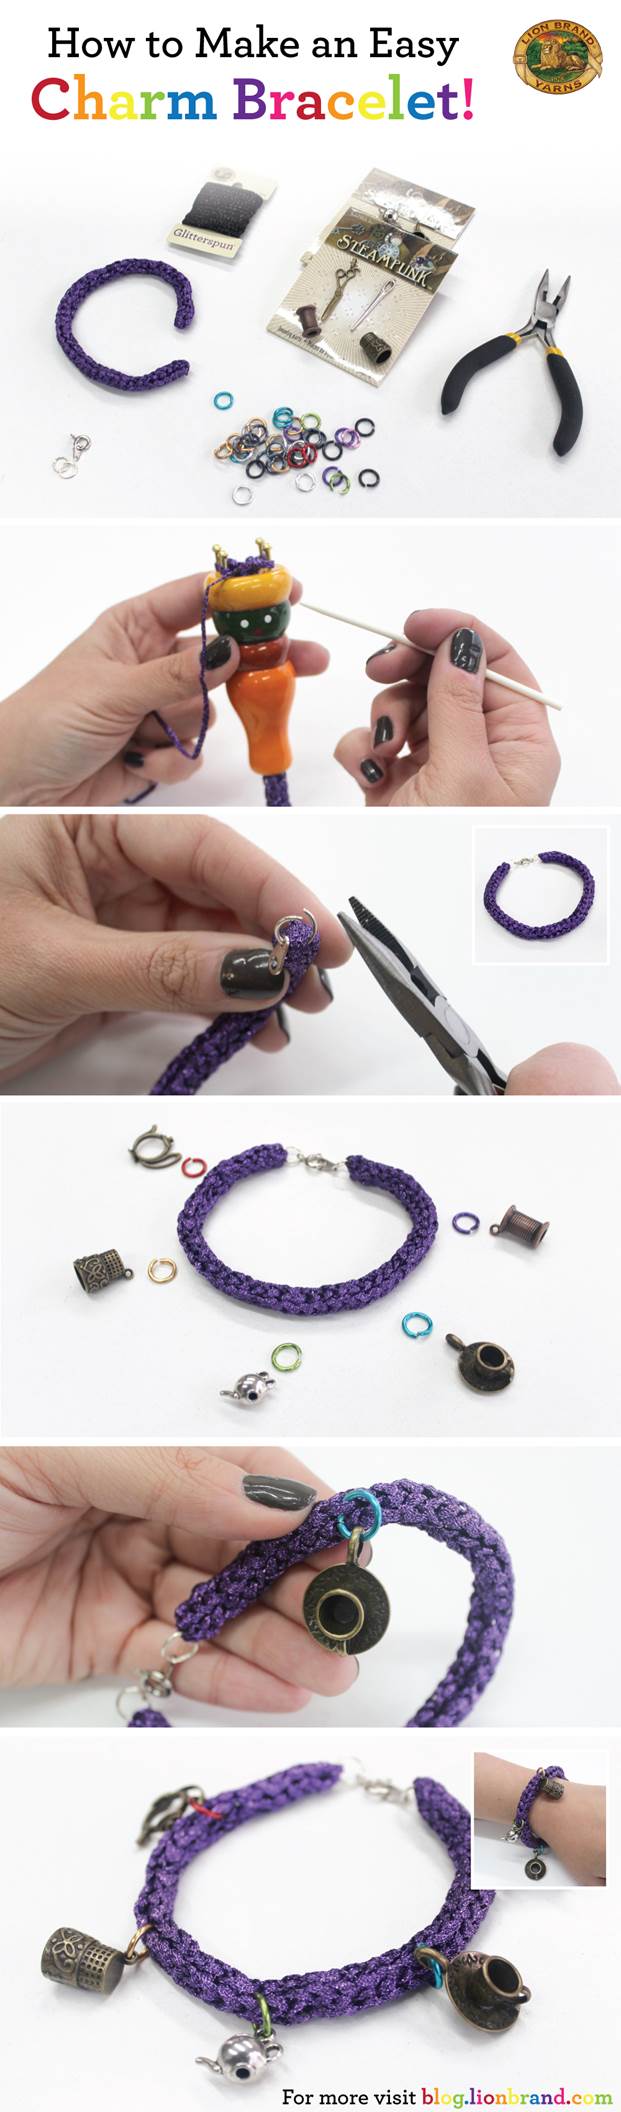 Make an Easy Charm Bracelet with a French Knitter!